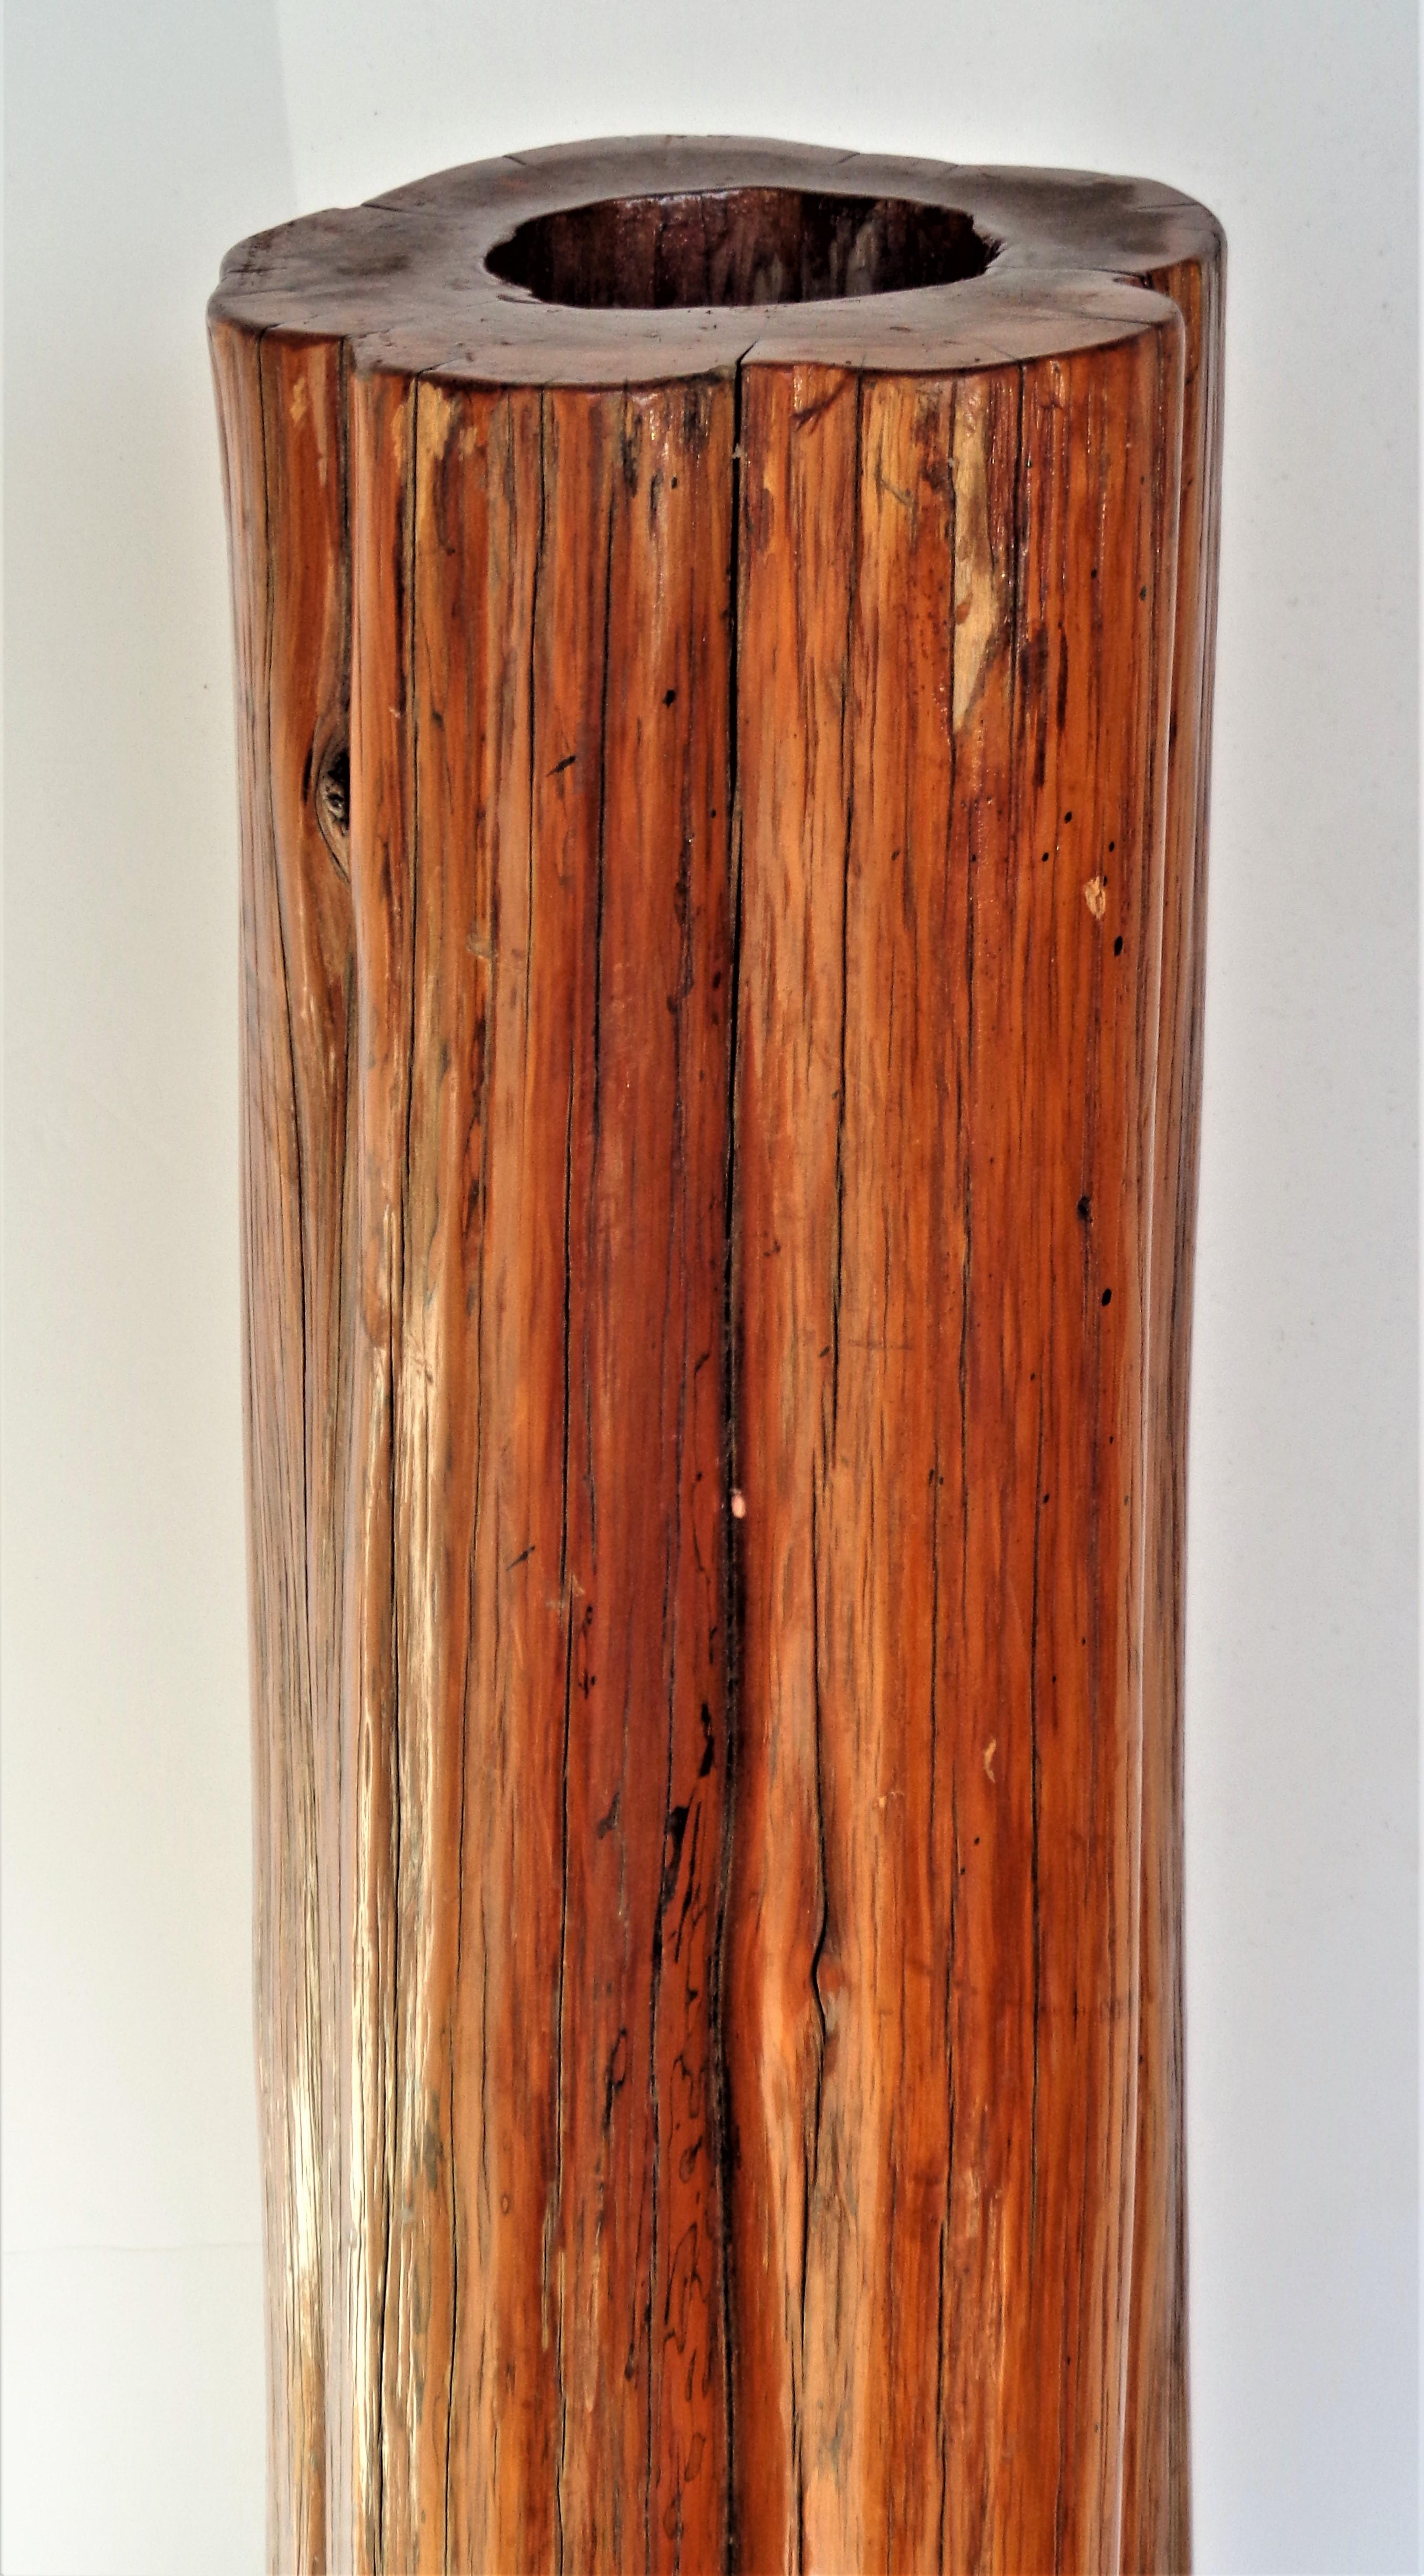 yew wood color